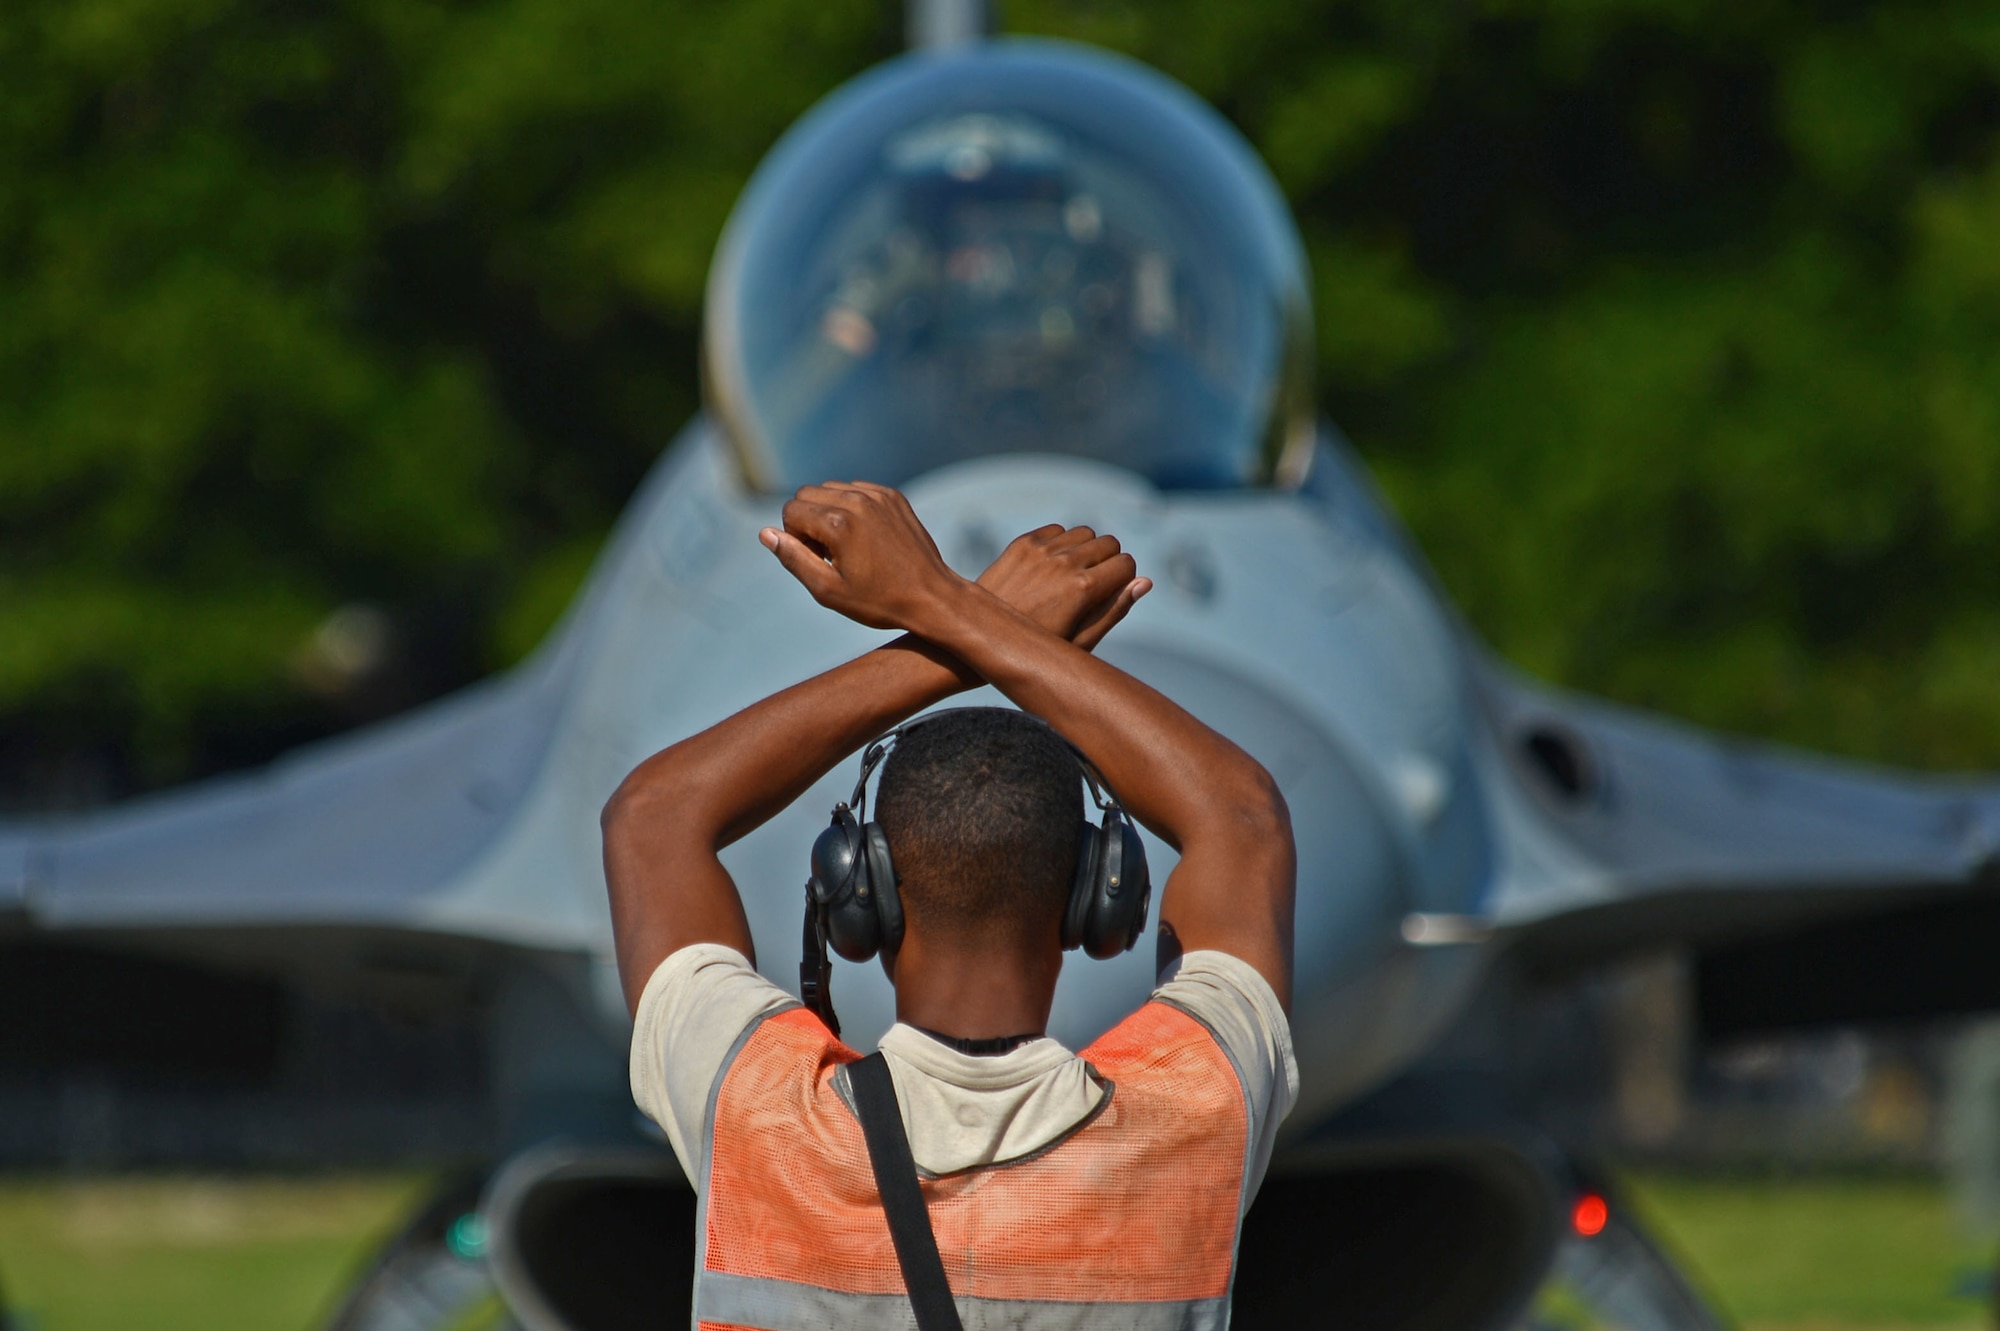 U.S. Air Force Airman 1st Class Cameron Crawford, 20th Aircraft Maintenance Squadron tactical aircraft maintainer, marshals an F-16CM Fighting Falcon for hot-pit refueling during a surge at Shaw Air Force Base, S.C., June 21, 2016. Throughout the surge, tactical aircraft maintainers marshalled over 30 aircraft a day. (U.S. Air Force photo by Airman 1st Class Christopher Maldonado)